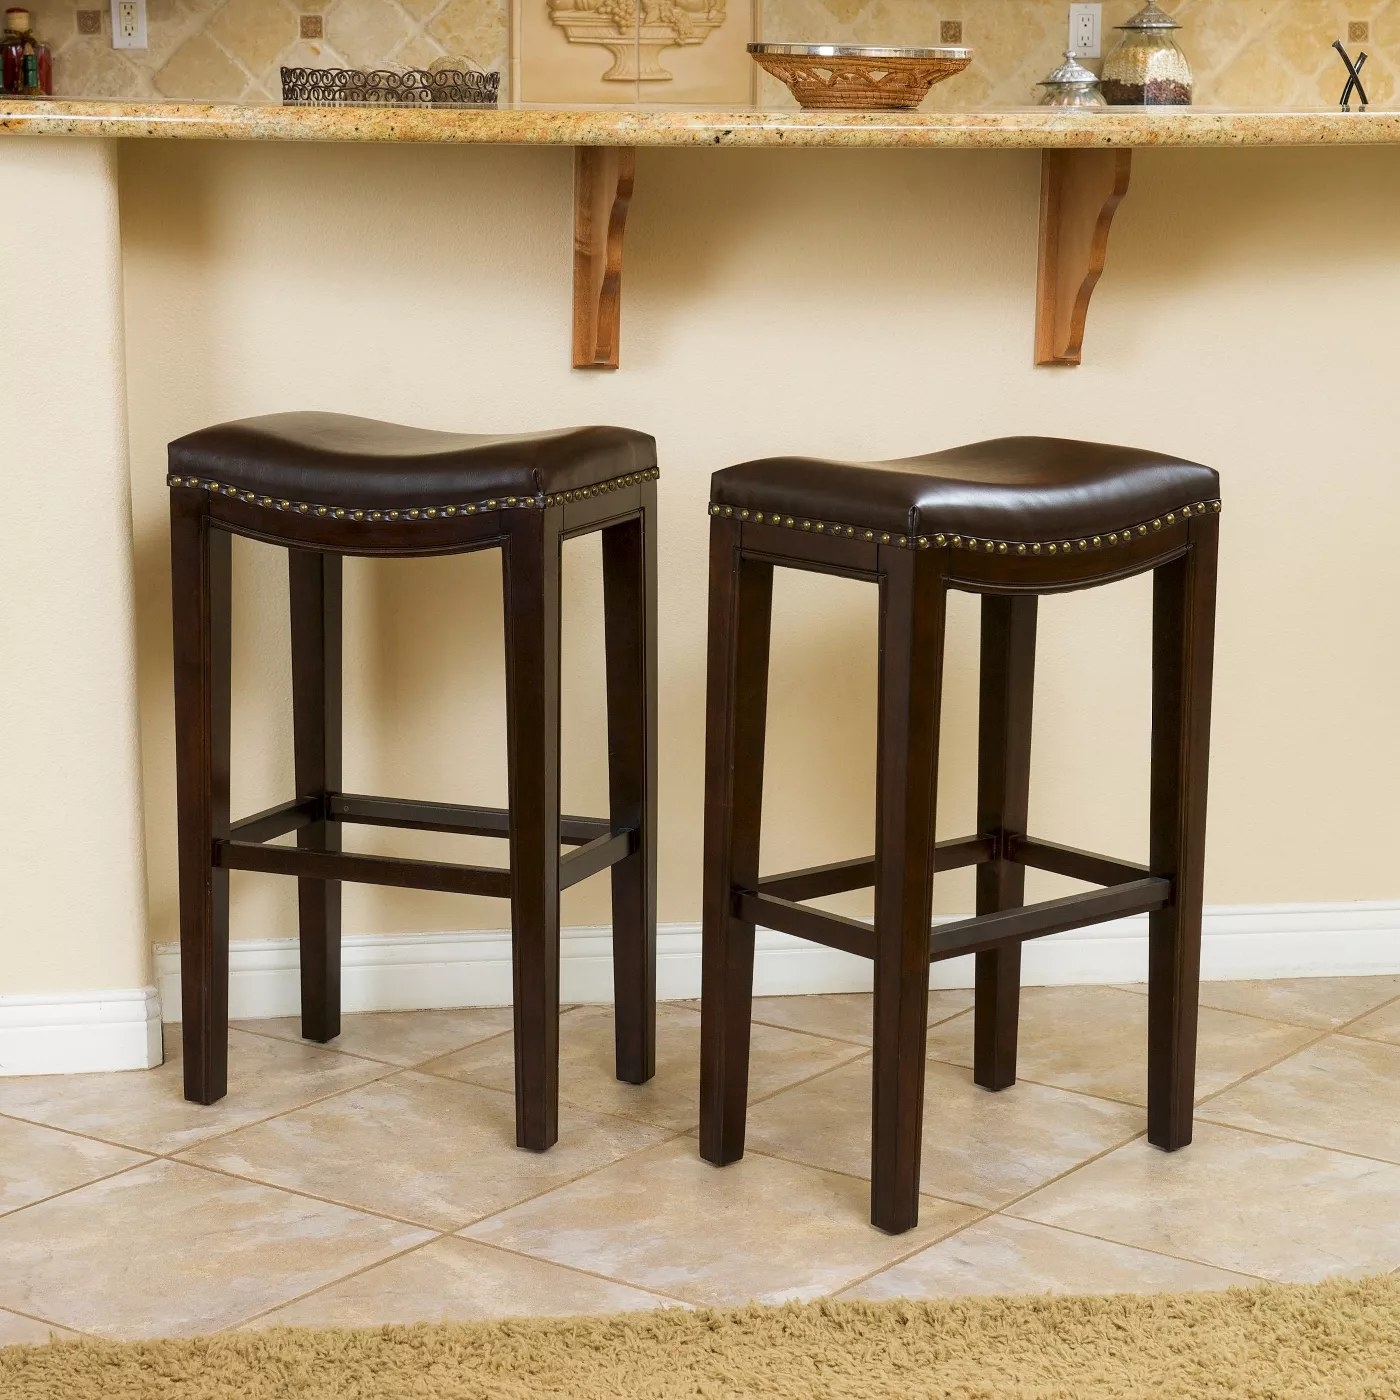 The backless, brown bar stools